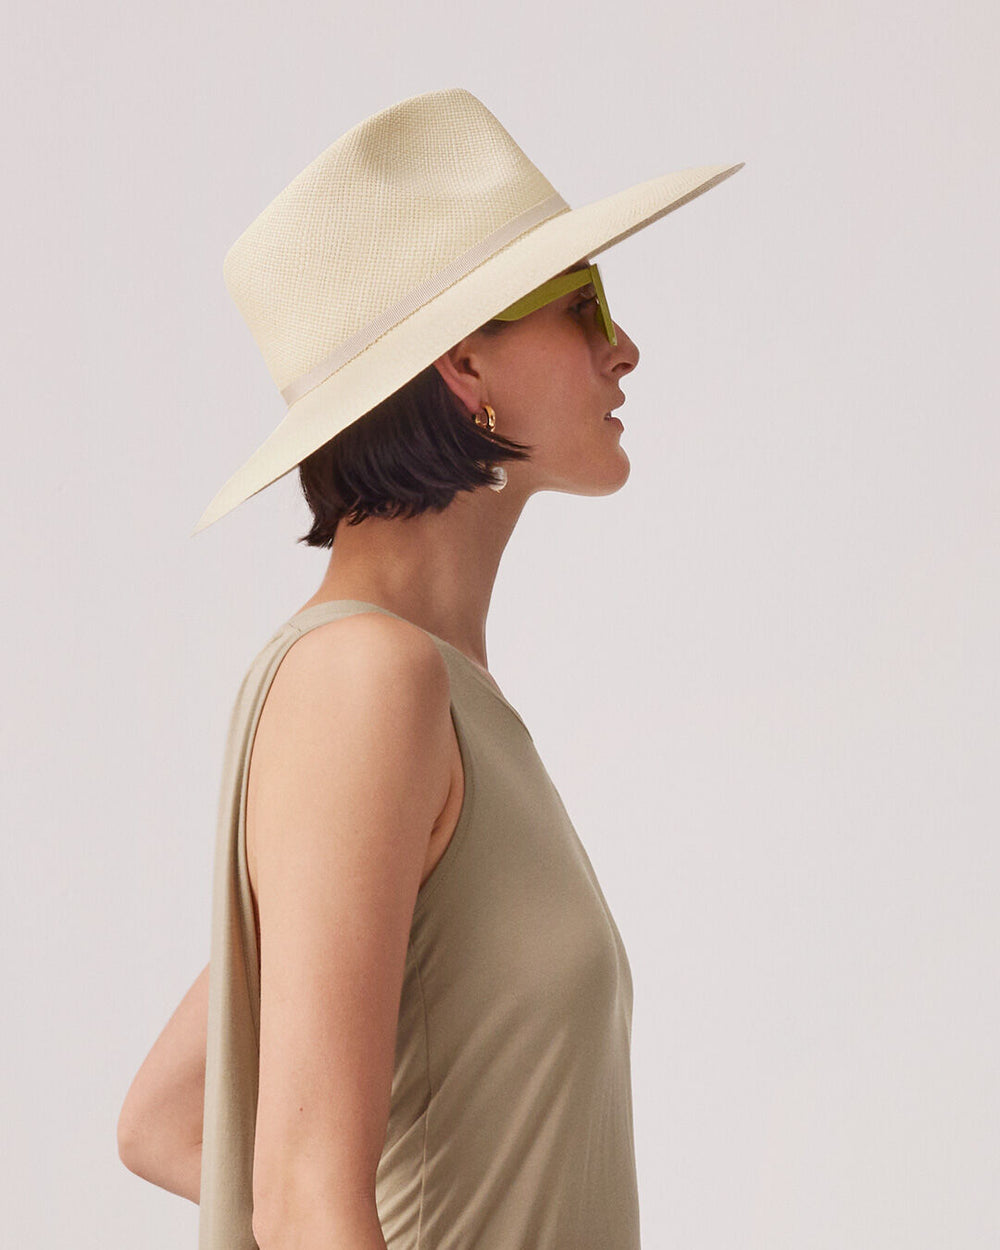 Profile of a person wearing a wide-brimmed hat and sunglasses, looking to the side.